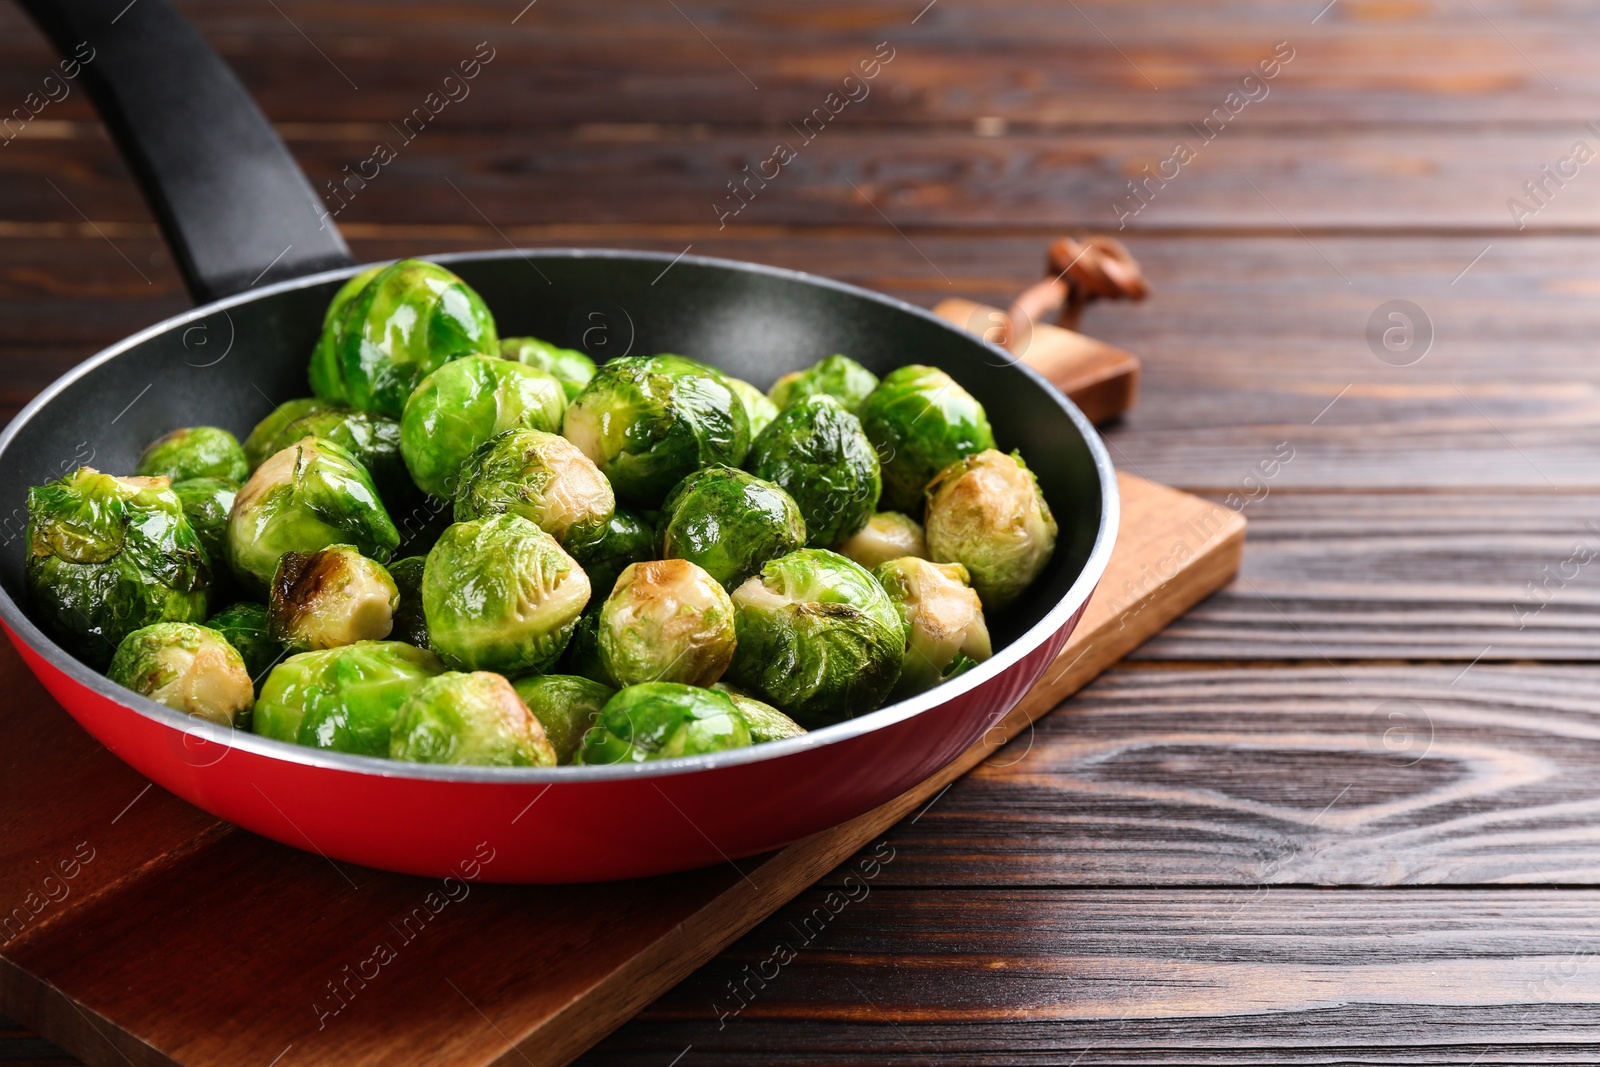 Photo of Roasted Brussels sprouts in frying pan on wooden table